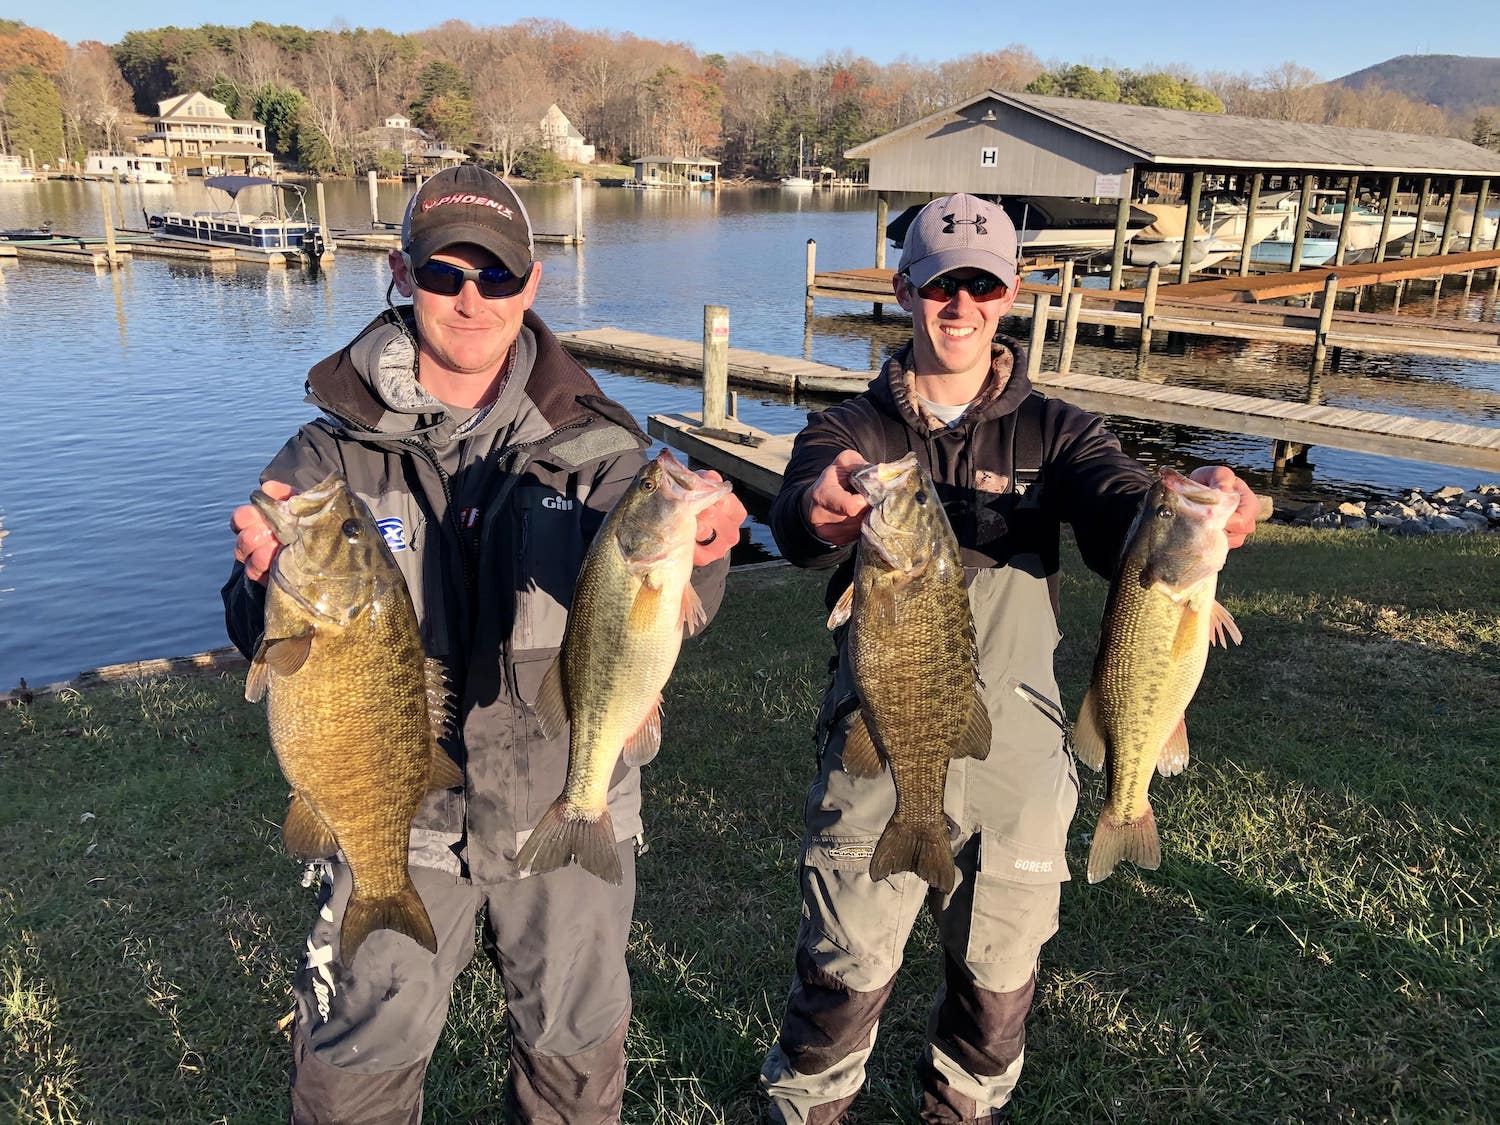 Chad & Elliot Pilosn Win the 2019 Bass Cast Classic on SML with 17.57 lbs